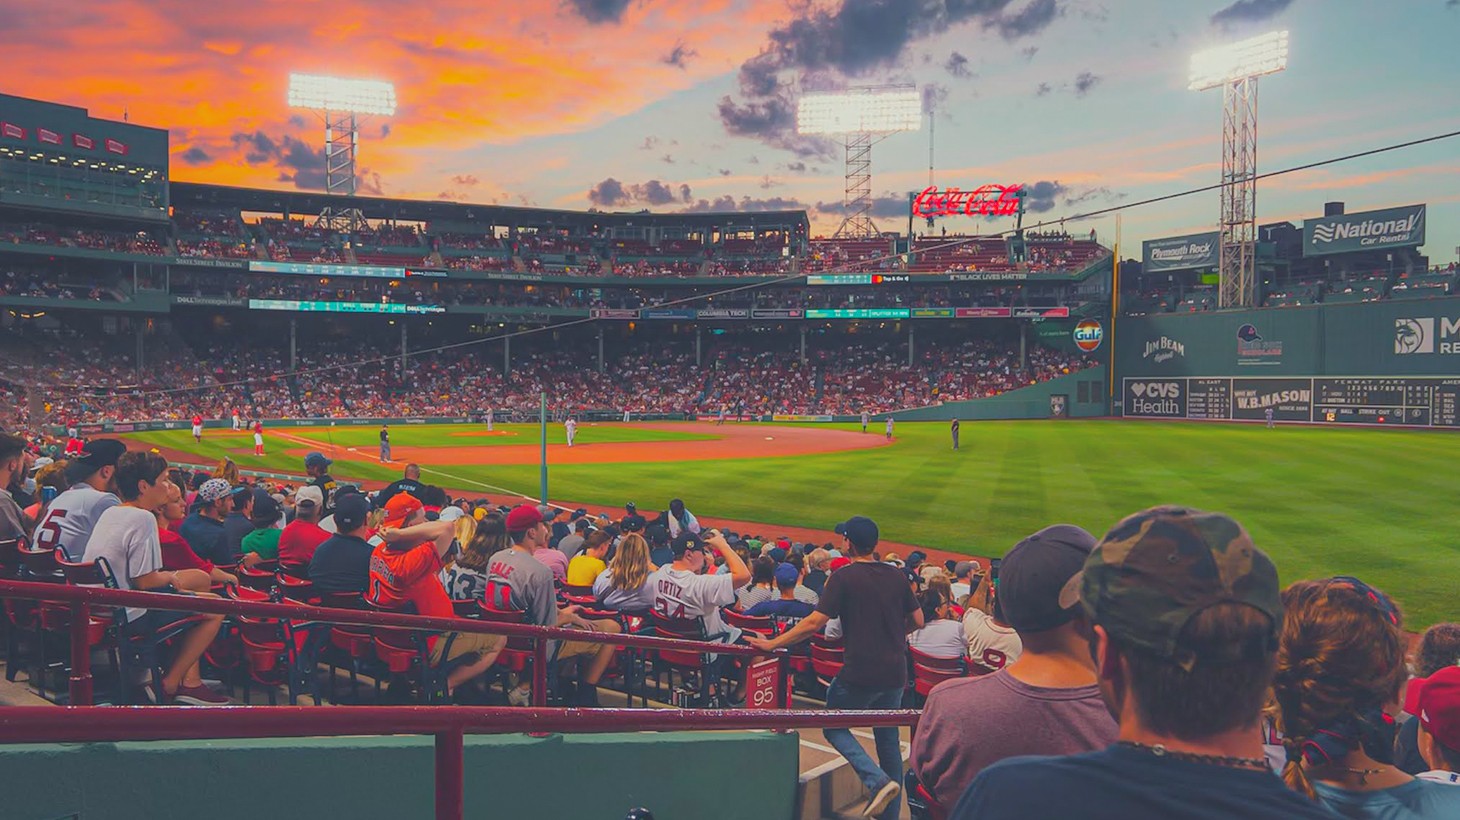 Where to park for Red Sox games at Fenway Park